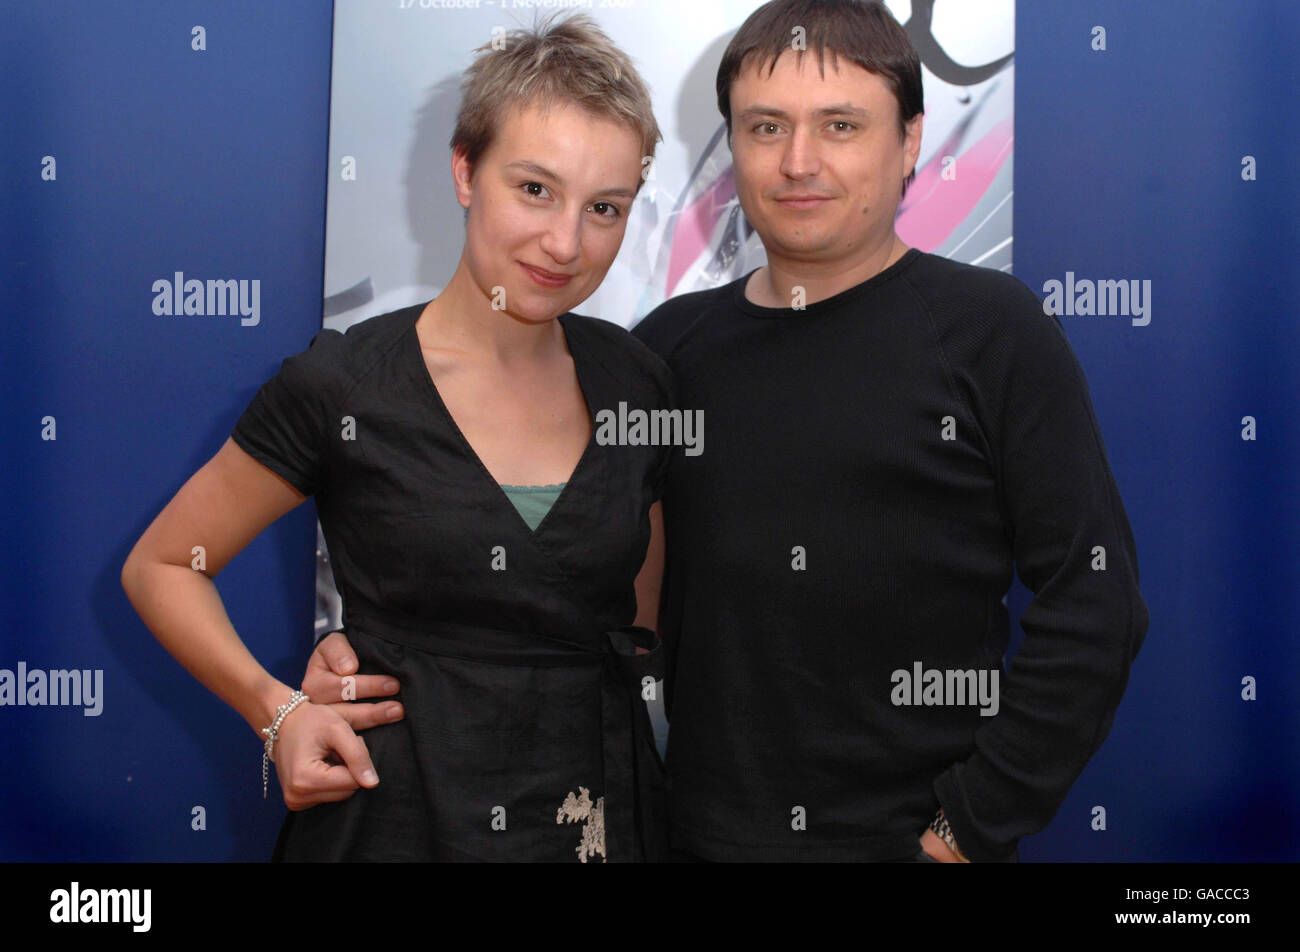 Actress Anamaria Marinca and director Cristian Mungiu arrive for the 51st BFI Film Festival, Sight and Sound special screening of her film 4 Months, 3 Weeks, 2 Days at the Odeon West End Cinema in Leicester Square in London. Stock Photo